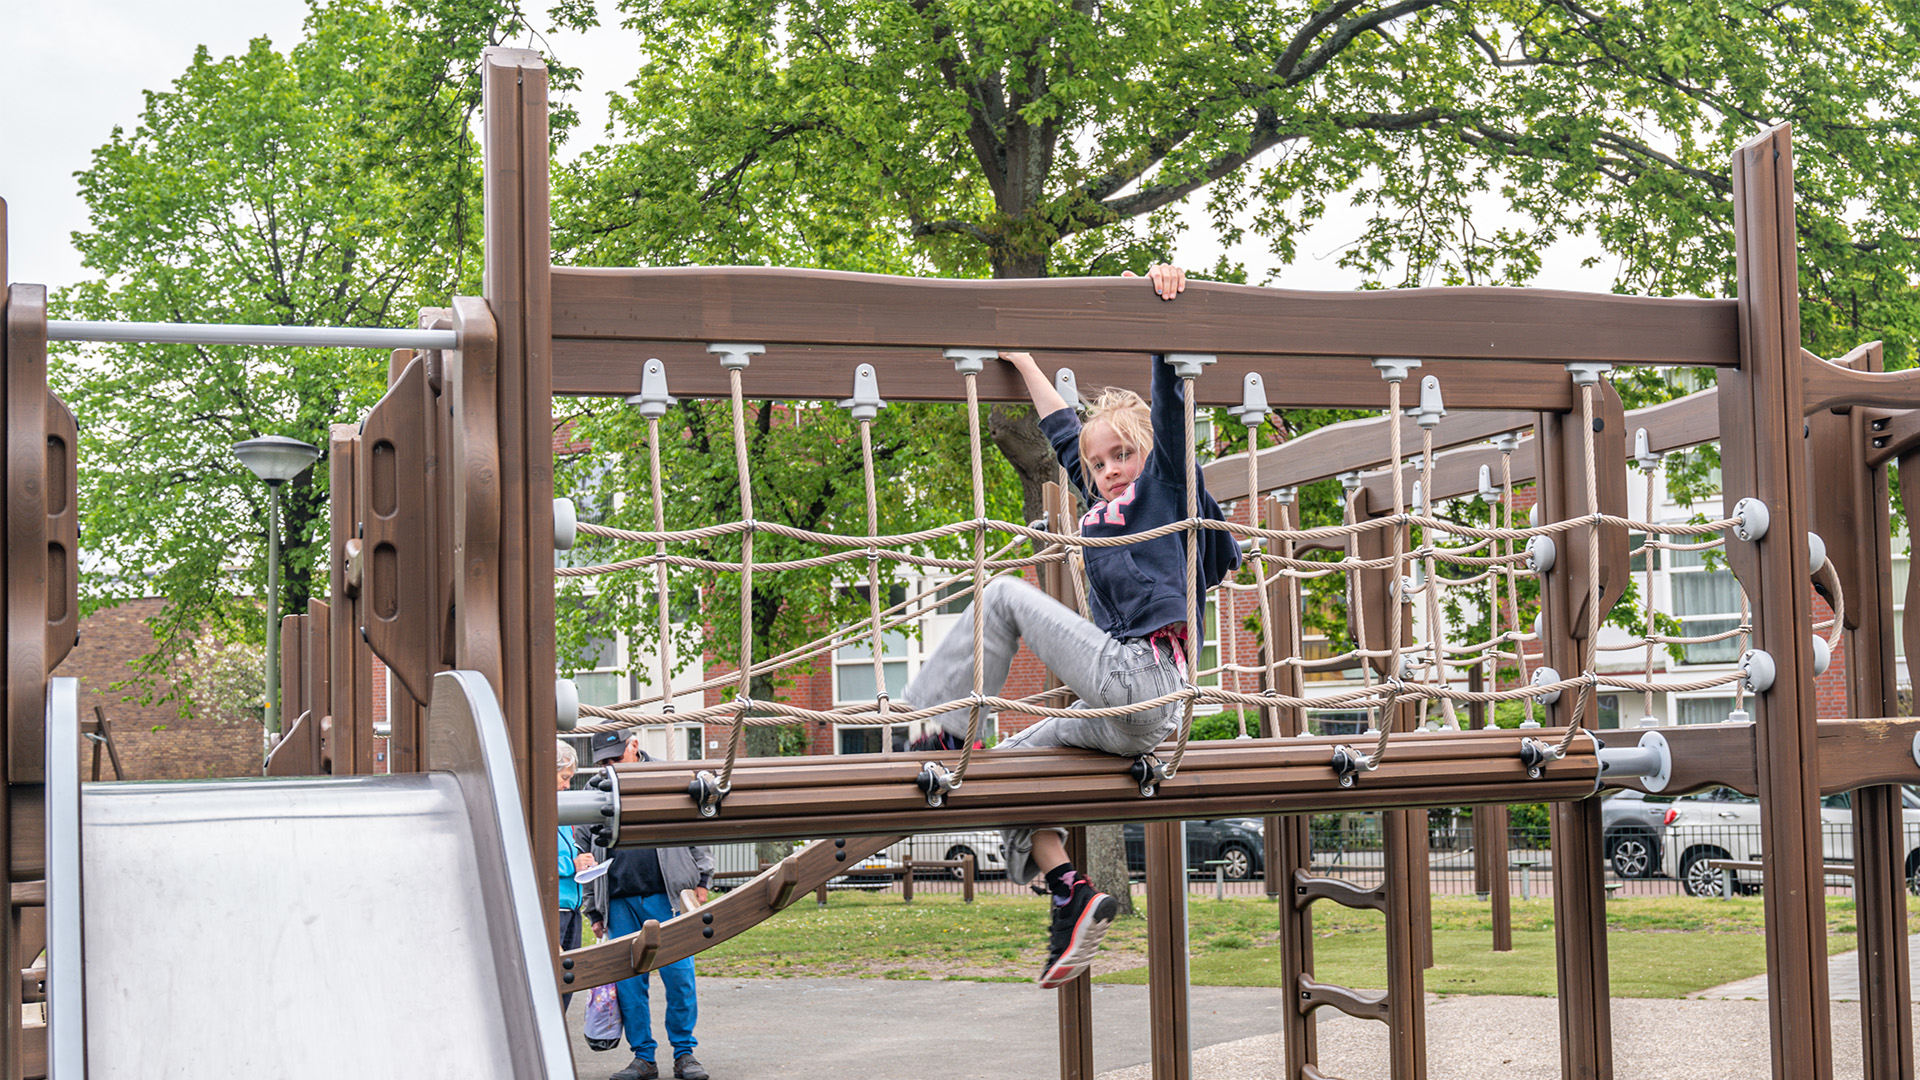 A young child with blonde hair is climbing on a rope bridge at a playground. She is holding onto the ropes with one hand while looking ahead. The playground equipment is brown, and there are trees and buildings in the background. Other children are in the distance.